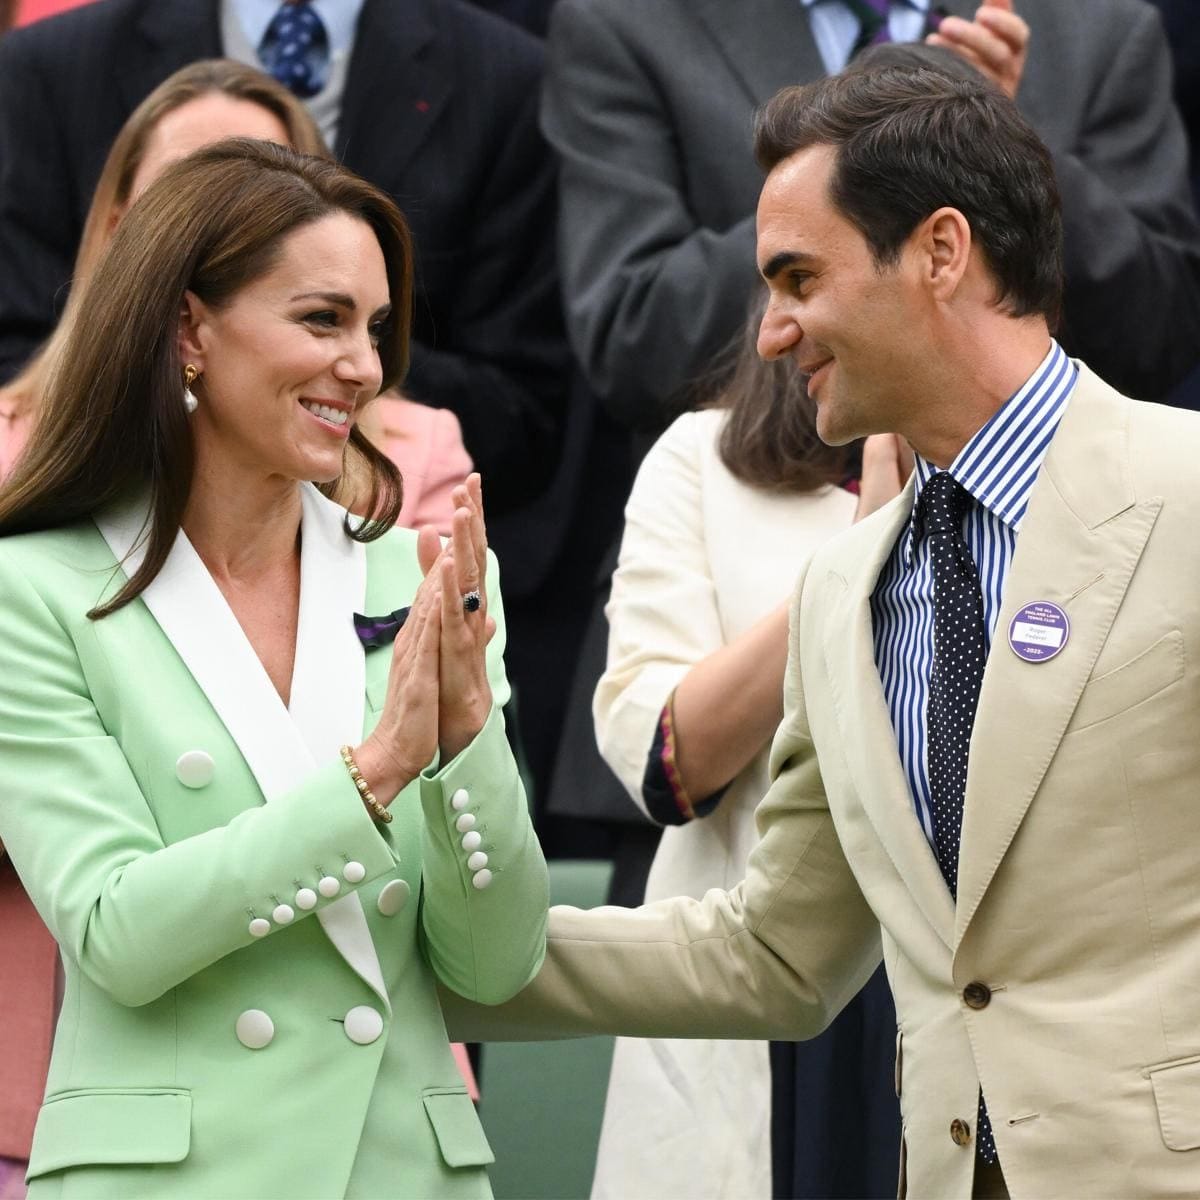 Roger greeted the Princess, who he played tennis with in their recent Wimbledon video.